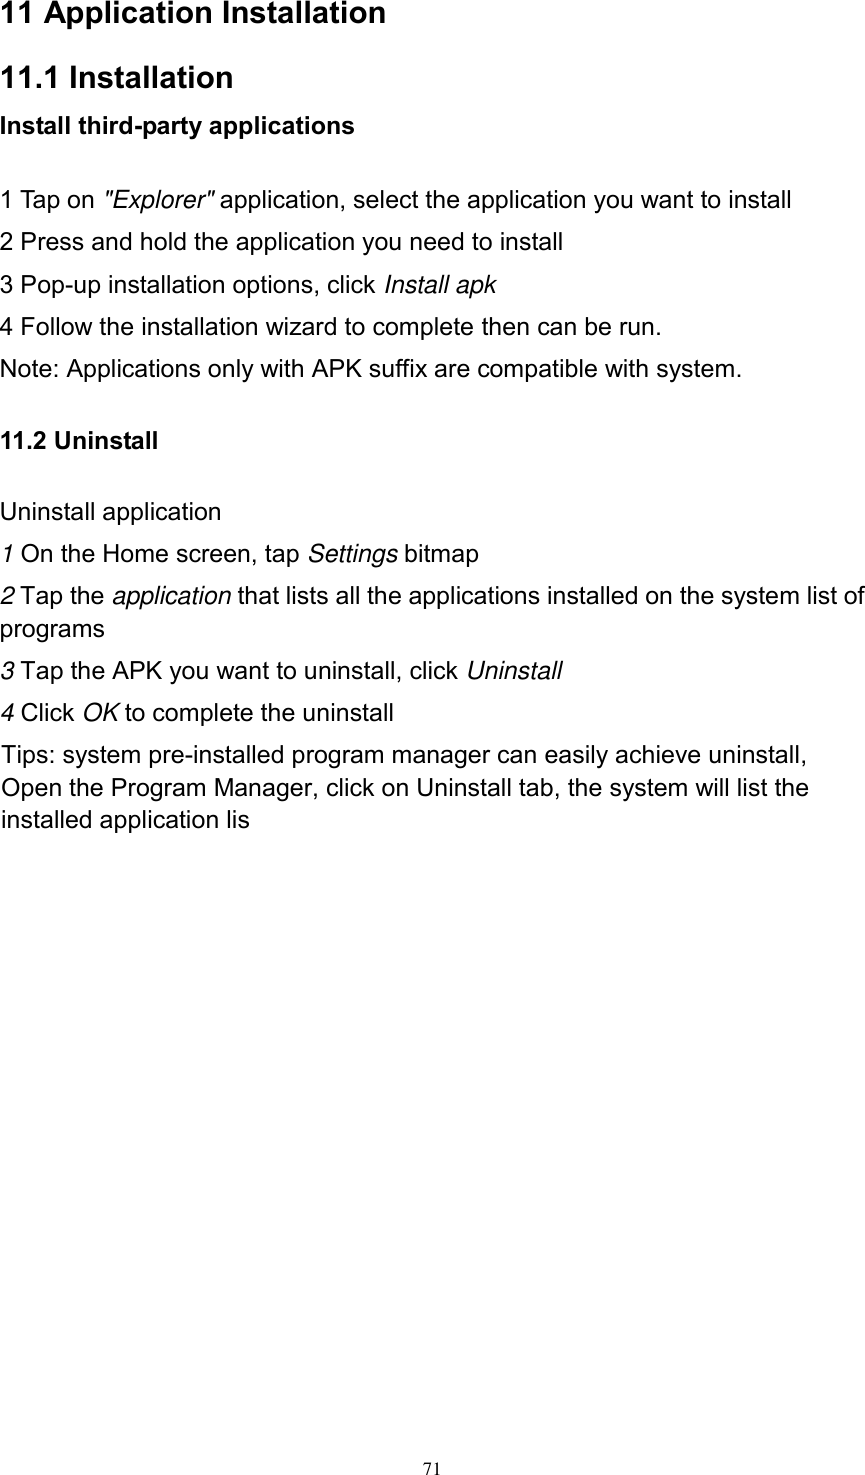      71 11 Application Installation 11.1 Installation Install third-party applications        1 Tap on &quot;Explorer&quot; application, select the application you want to install 2 Press and hold the application you need to install 3 Pop-up installation options, click Install apk 4 Follow the installation wizard to complete then can be run. Note: Applications only with APK suffix are compatible with system. 11.2 Uninstall Uninstall application 1 On the Home screen, tap Settings bitmap 2 Tap the application that lists all the applications installed on the system list of programs 3 Tap the APK you want to uninstall, click Uninstall 4 Click OK to complete the uninstall Tips: system pre-installed program manager can easily achieve uninstall, Open the Program Manager, click on Uninstall tab, the system will list the installed application lis           